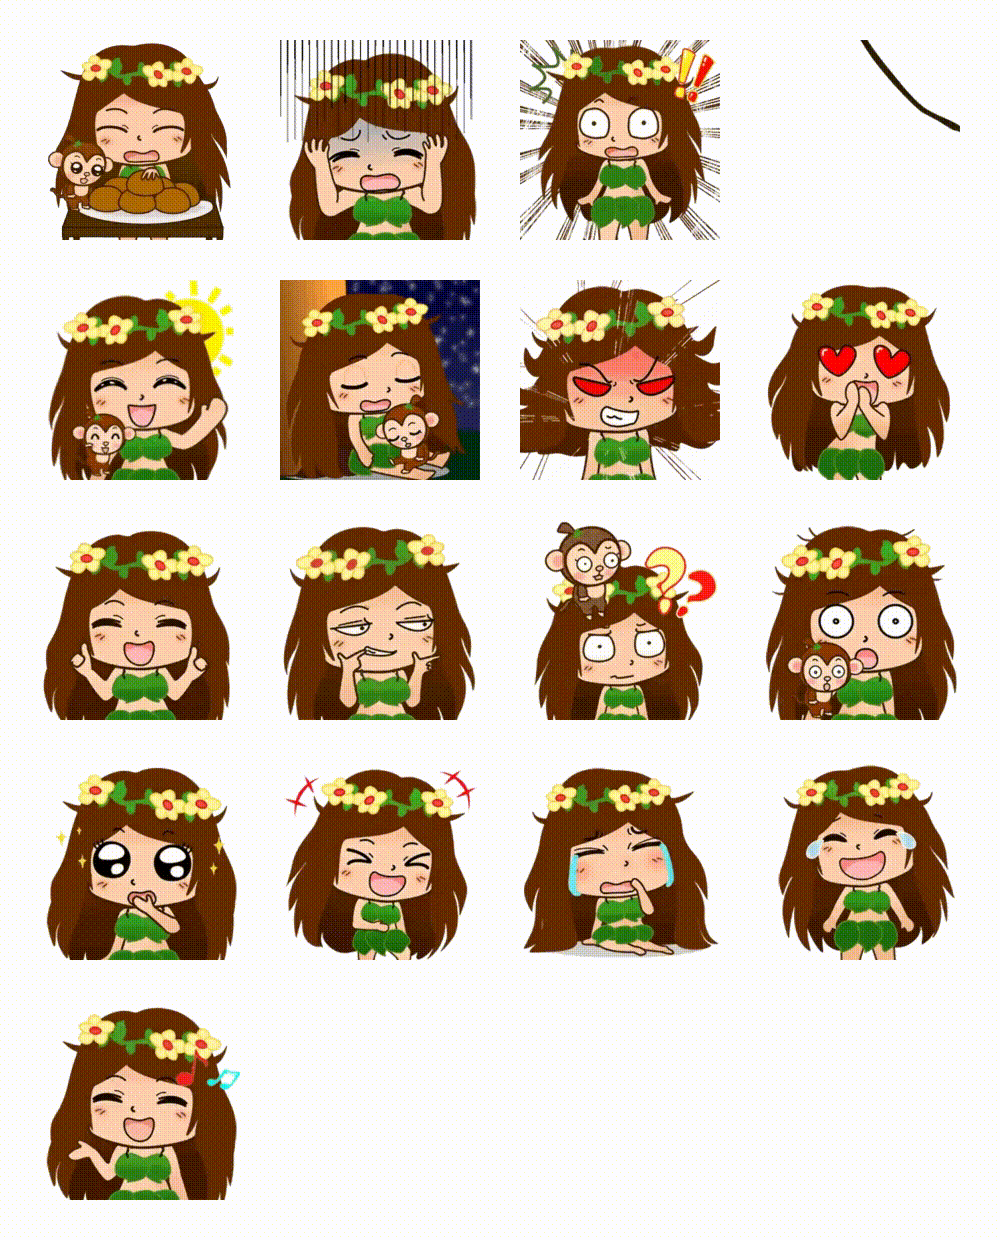 Girl Tarzan Yiner Animation/Cartoon,People sticker pack for Whatsapp, Telegram, Signal, and others chatting and message apps